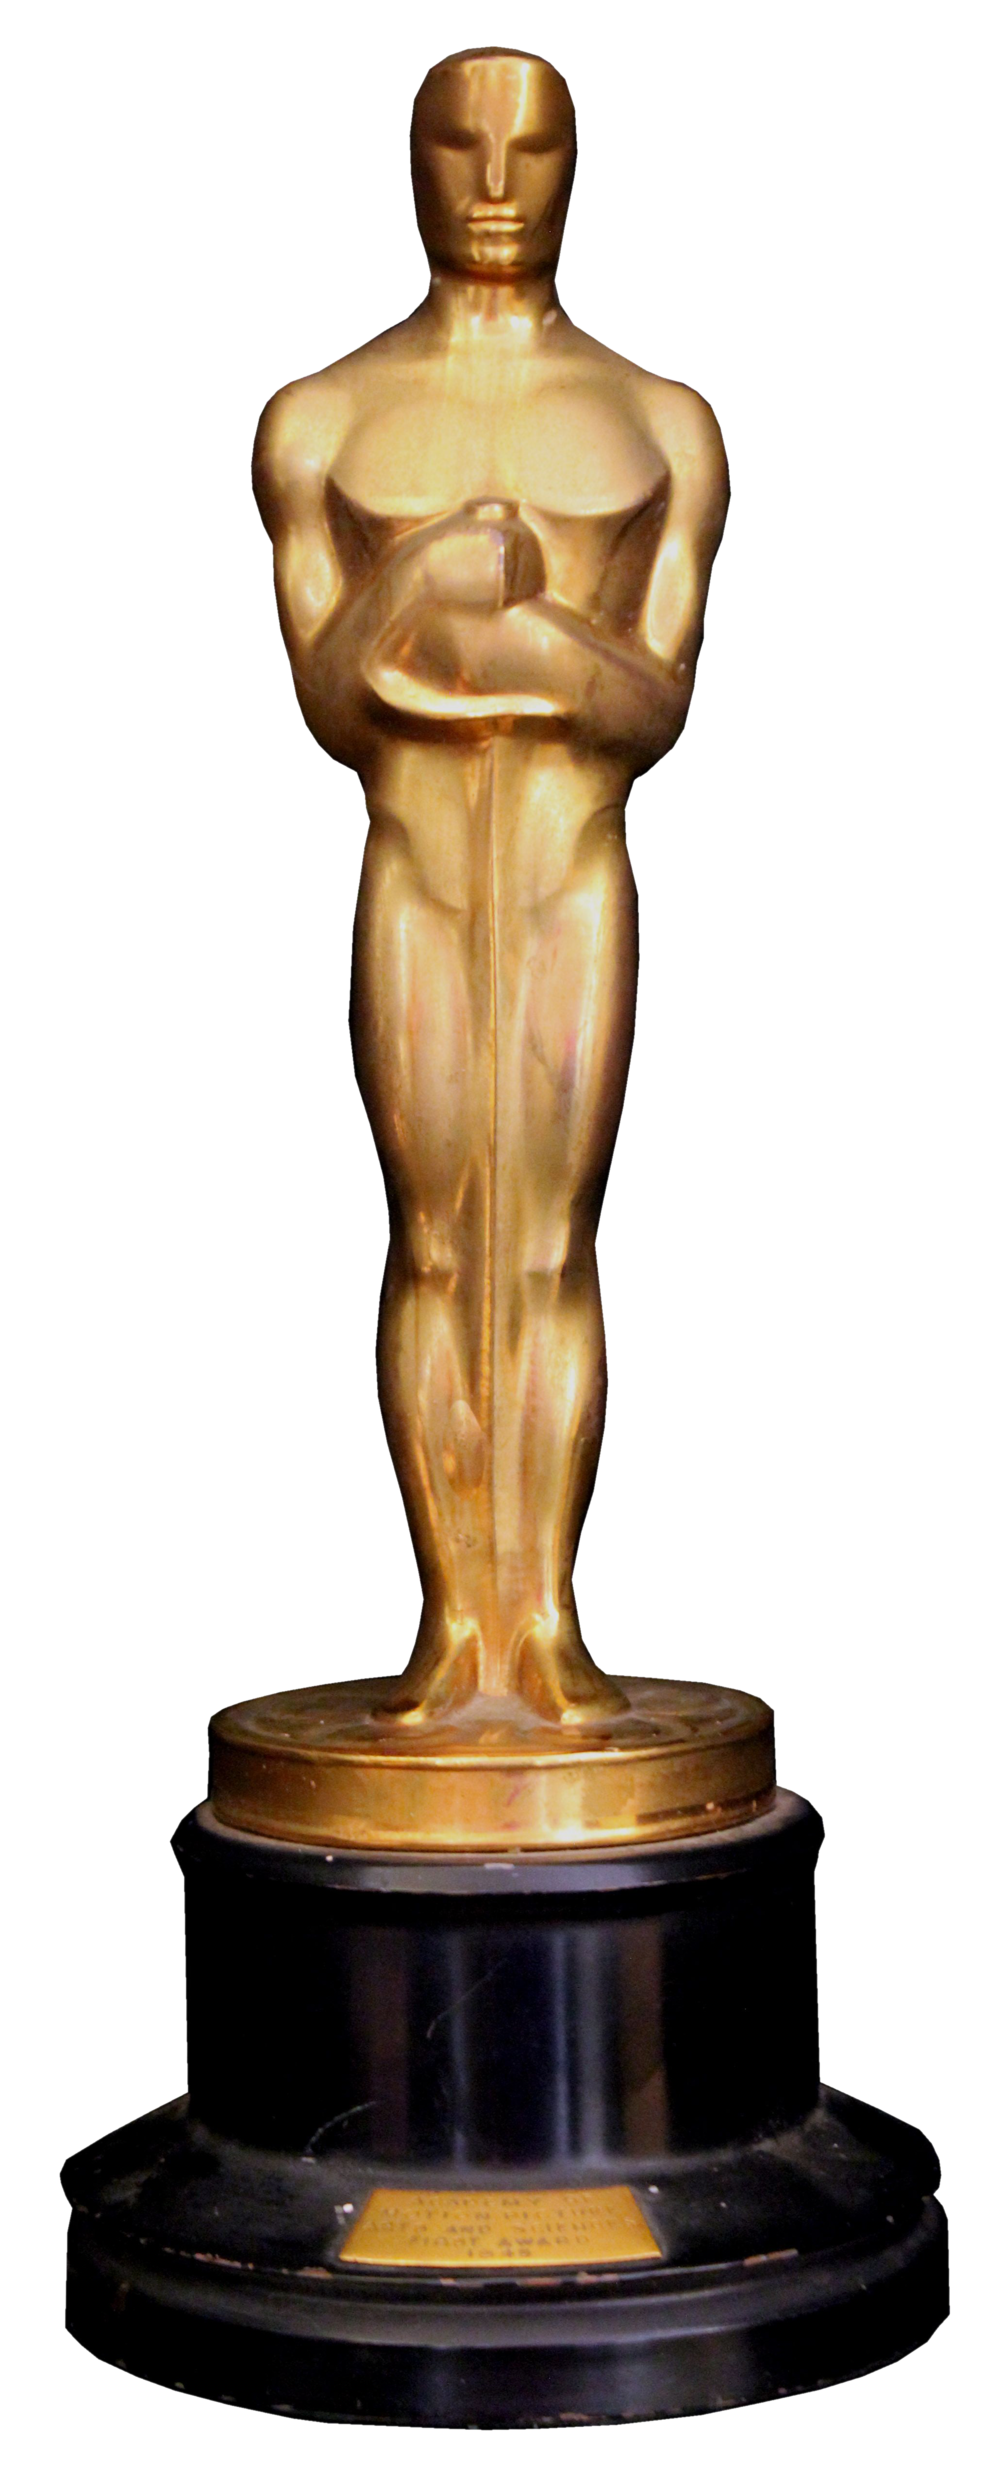 Oscar Academy Awards PNG Pic Background